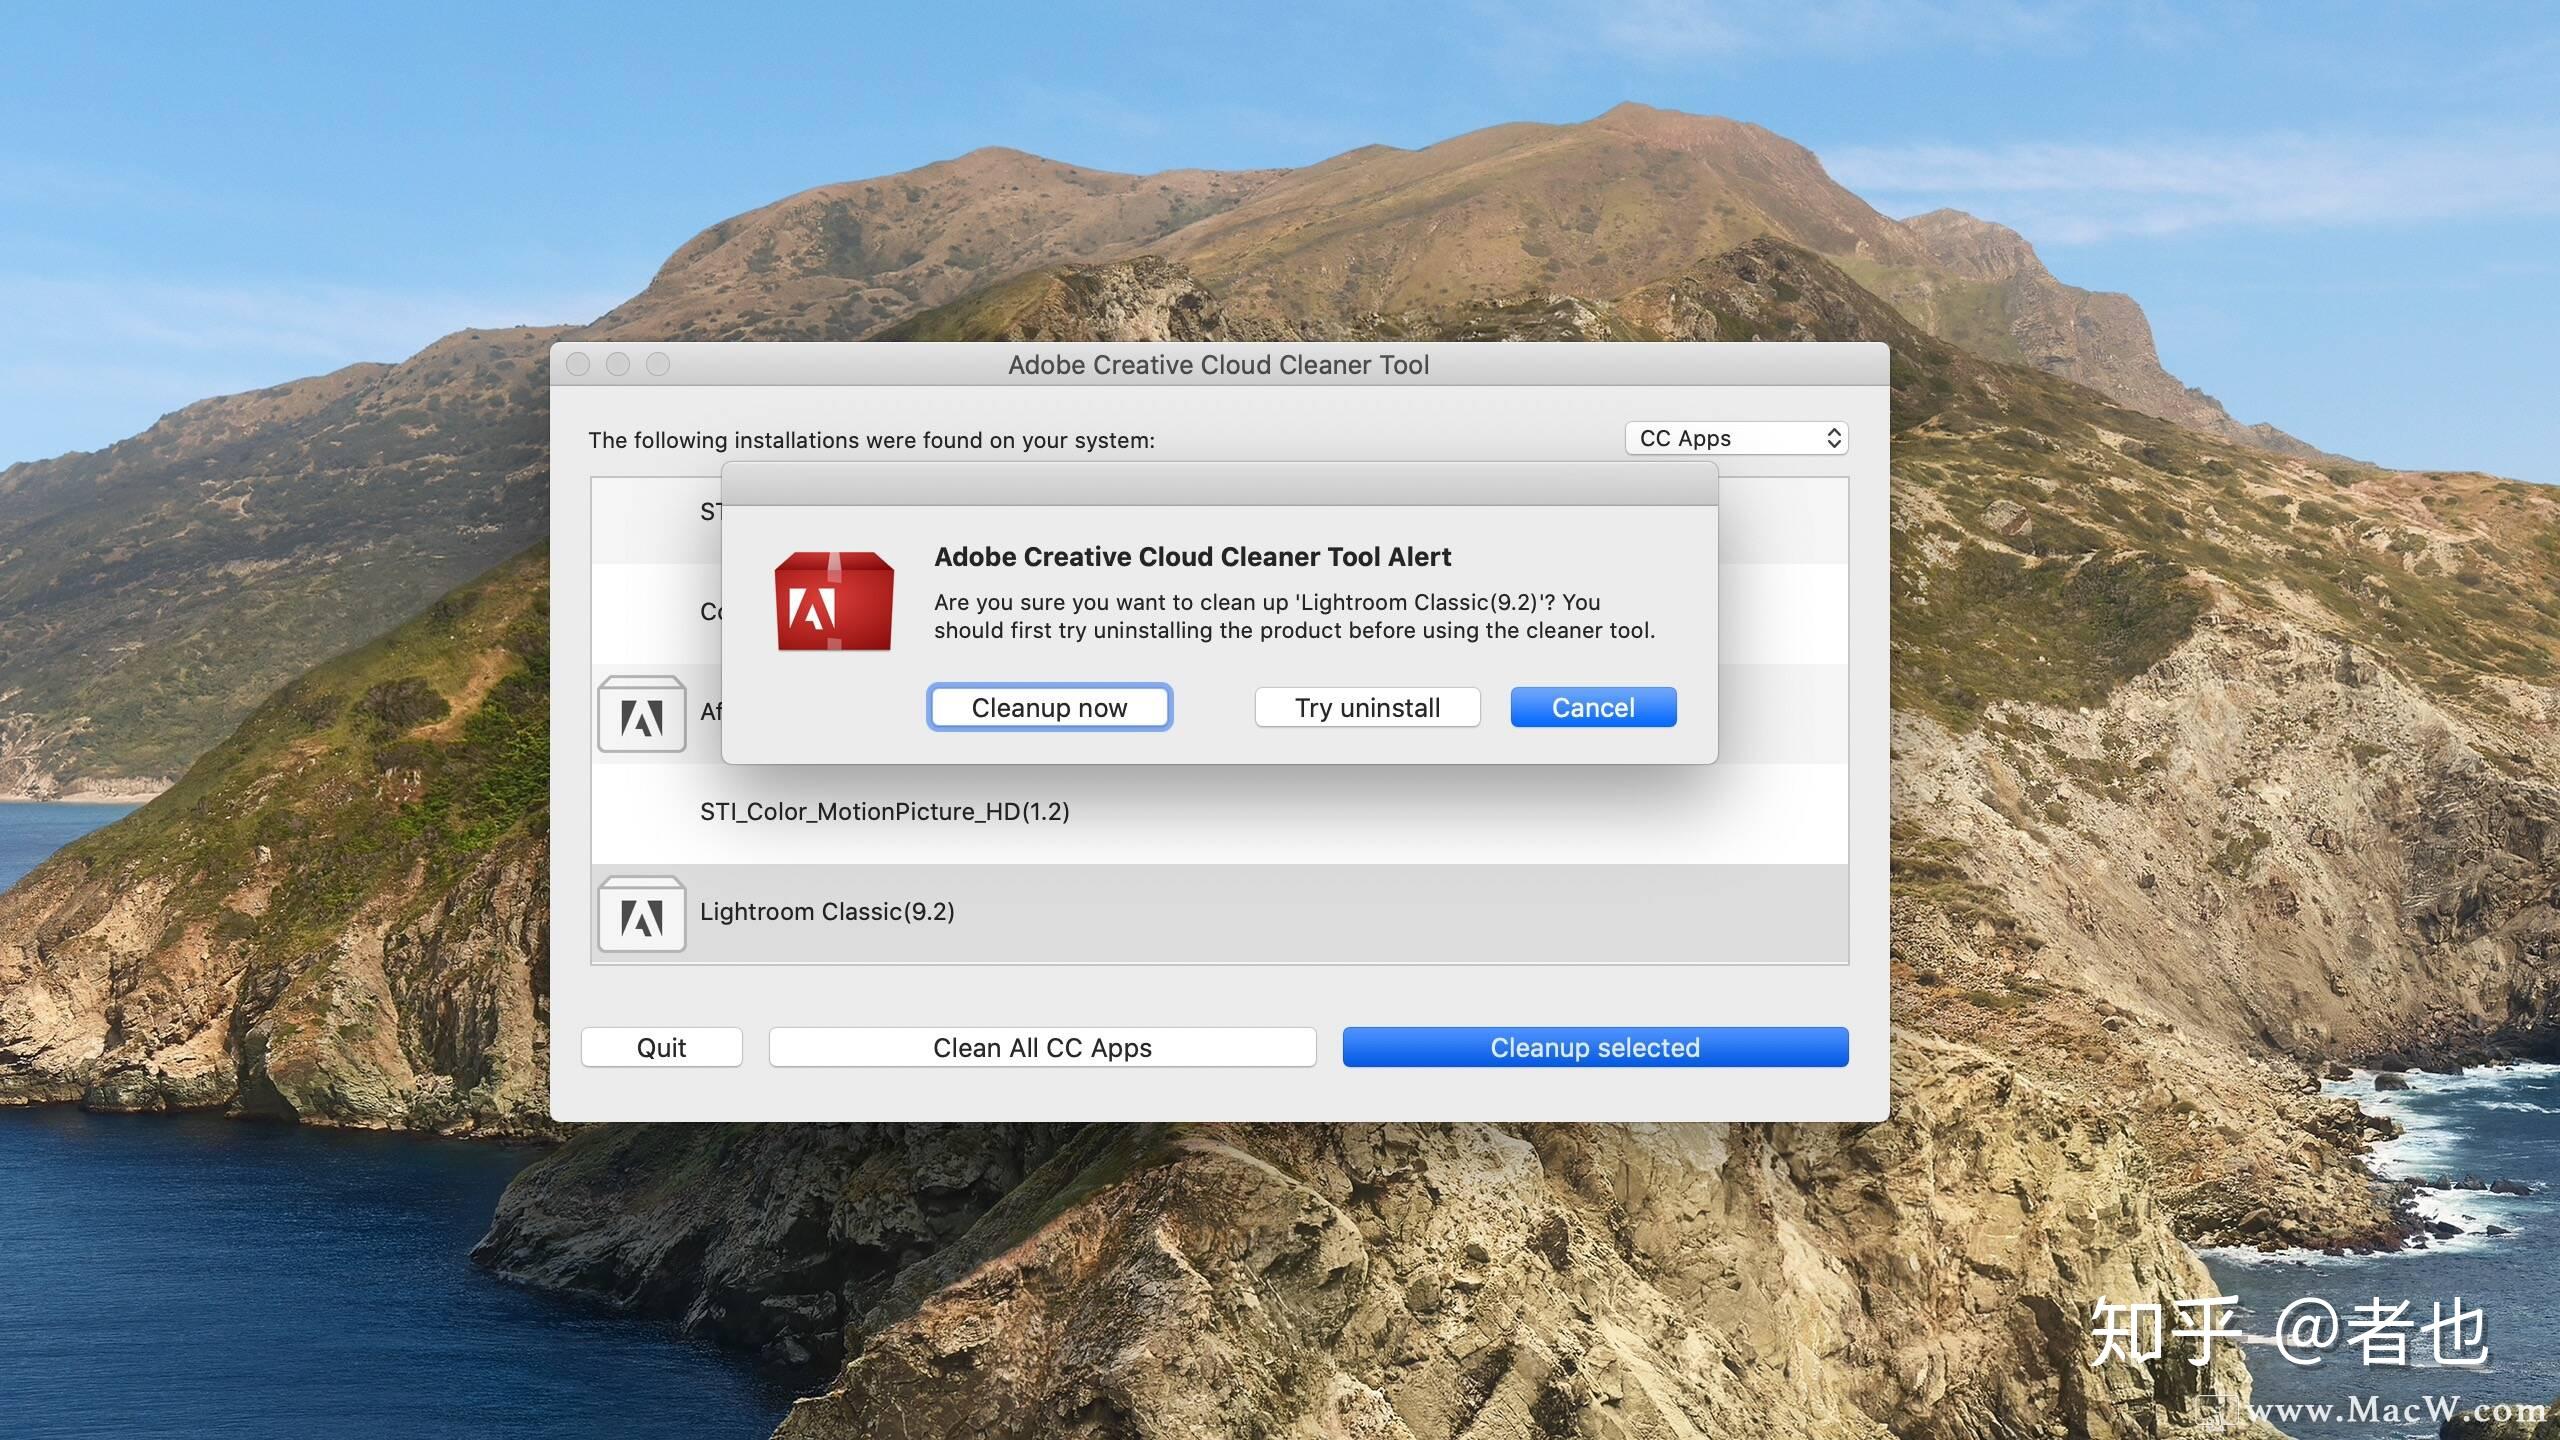 Adobe Creative Cloud Cleaner Tool 4.3.0.434 download the last version for ios